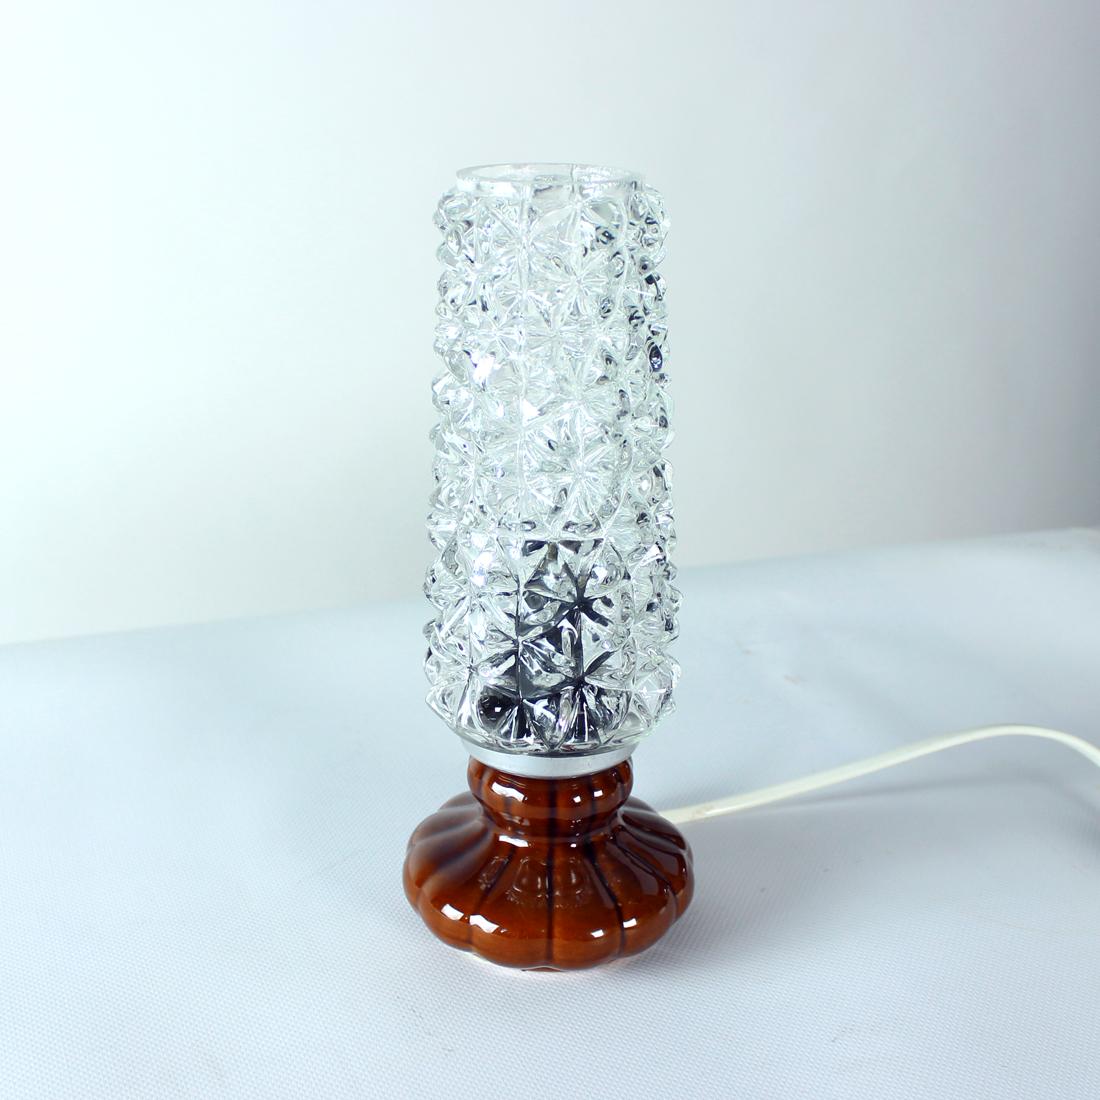 Midcentury Table Lamp In Ceramic & Glass, Czechoslovakia 1960s For Sale 4